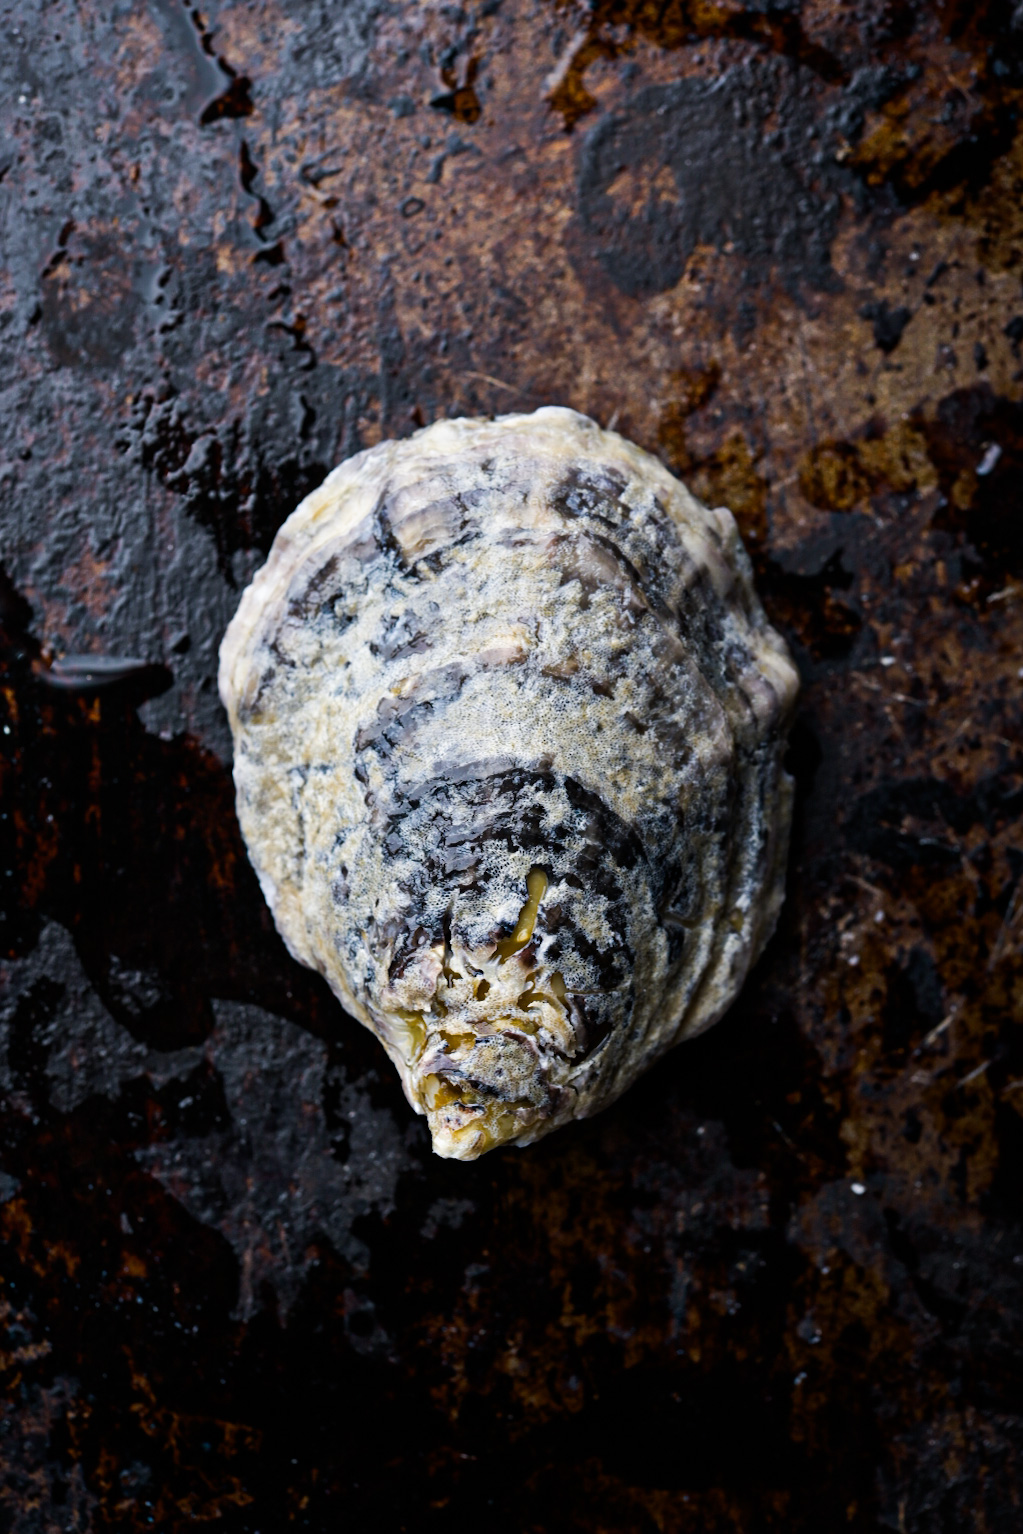 Details of an off-bottom oyster harvested in Grand Isle, Louisiana